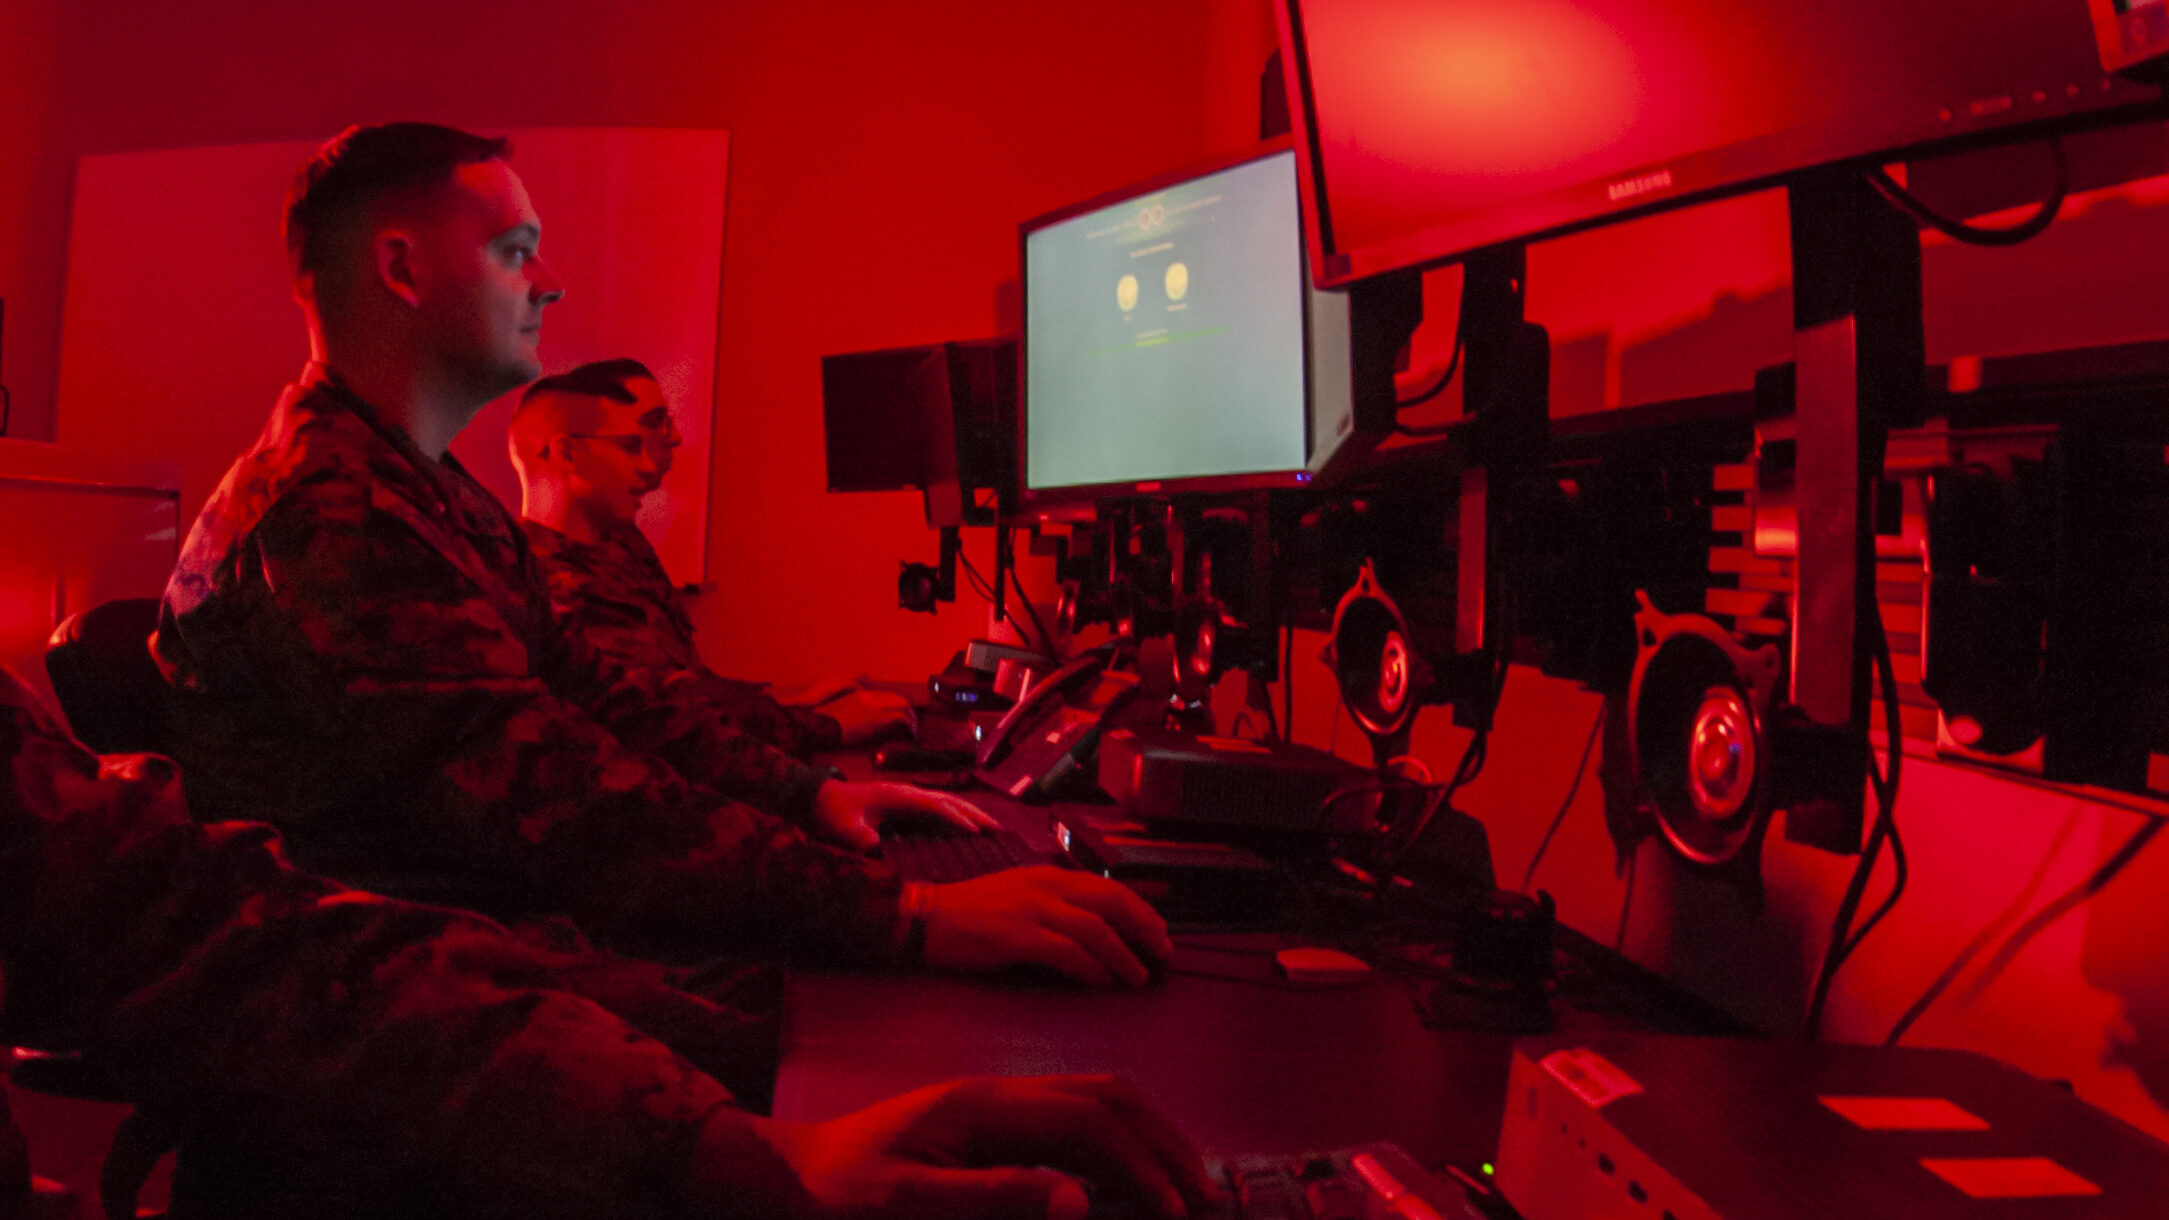 Marines with Marine Corps Forces Cyberspace Command pose for photos in cyber operations room at Lasswell Hall aboard Fort Meade, Maryland, Feb. 5, 2020. MARFORCYBER Marines conduct offensive and defensive cyber operations in support of United States Cyber Command and operate, secure and defend the Marine Corps Enterprise Network.